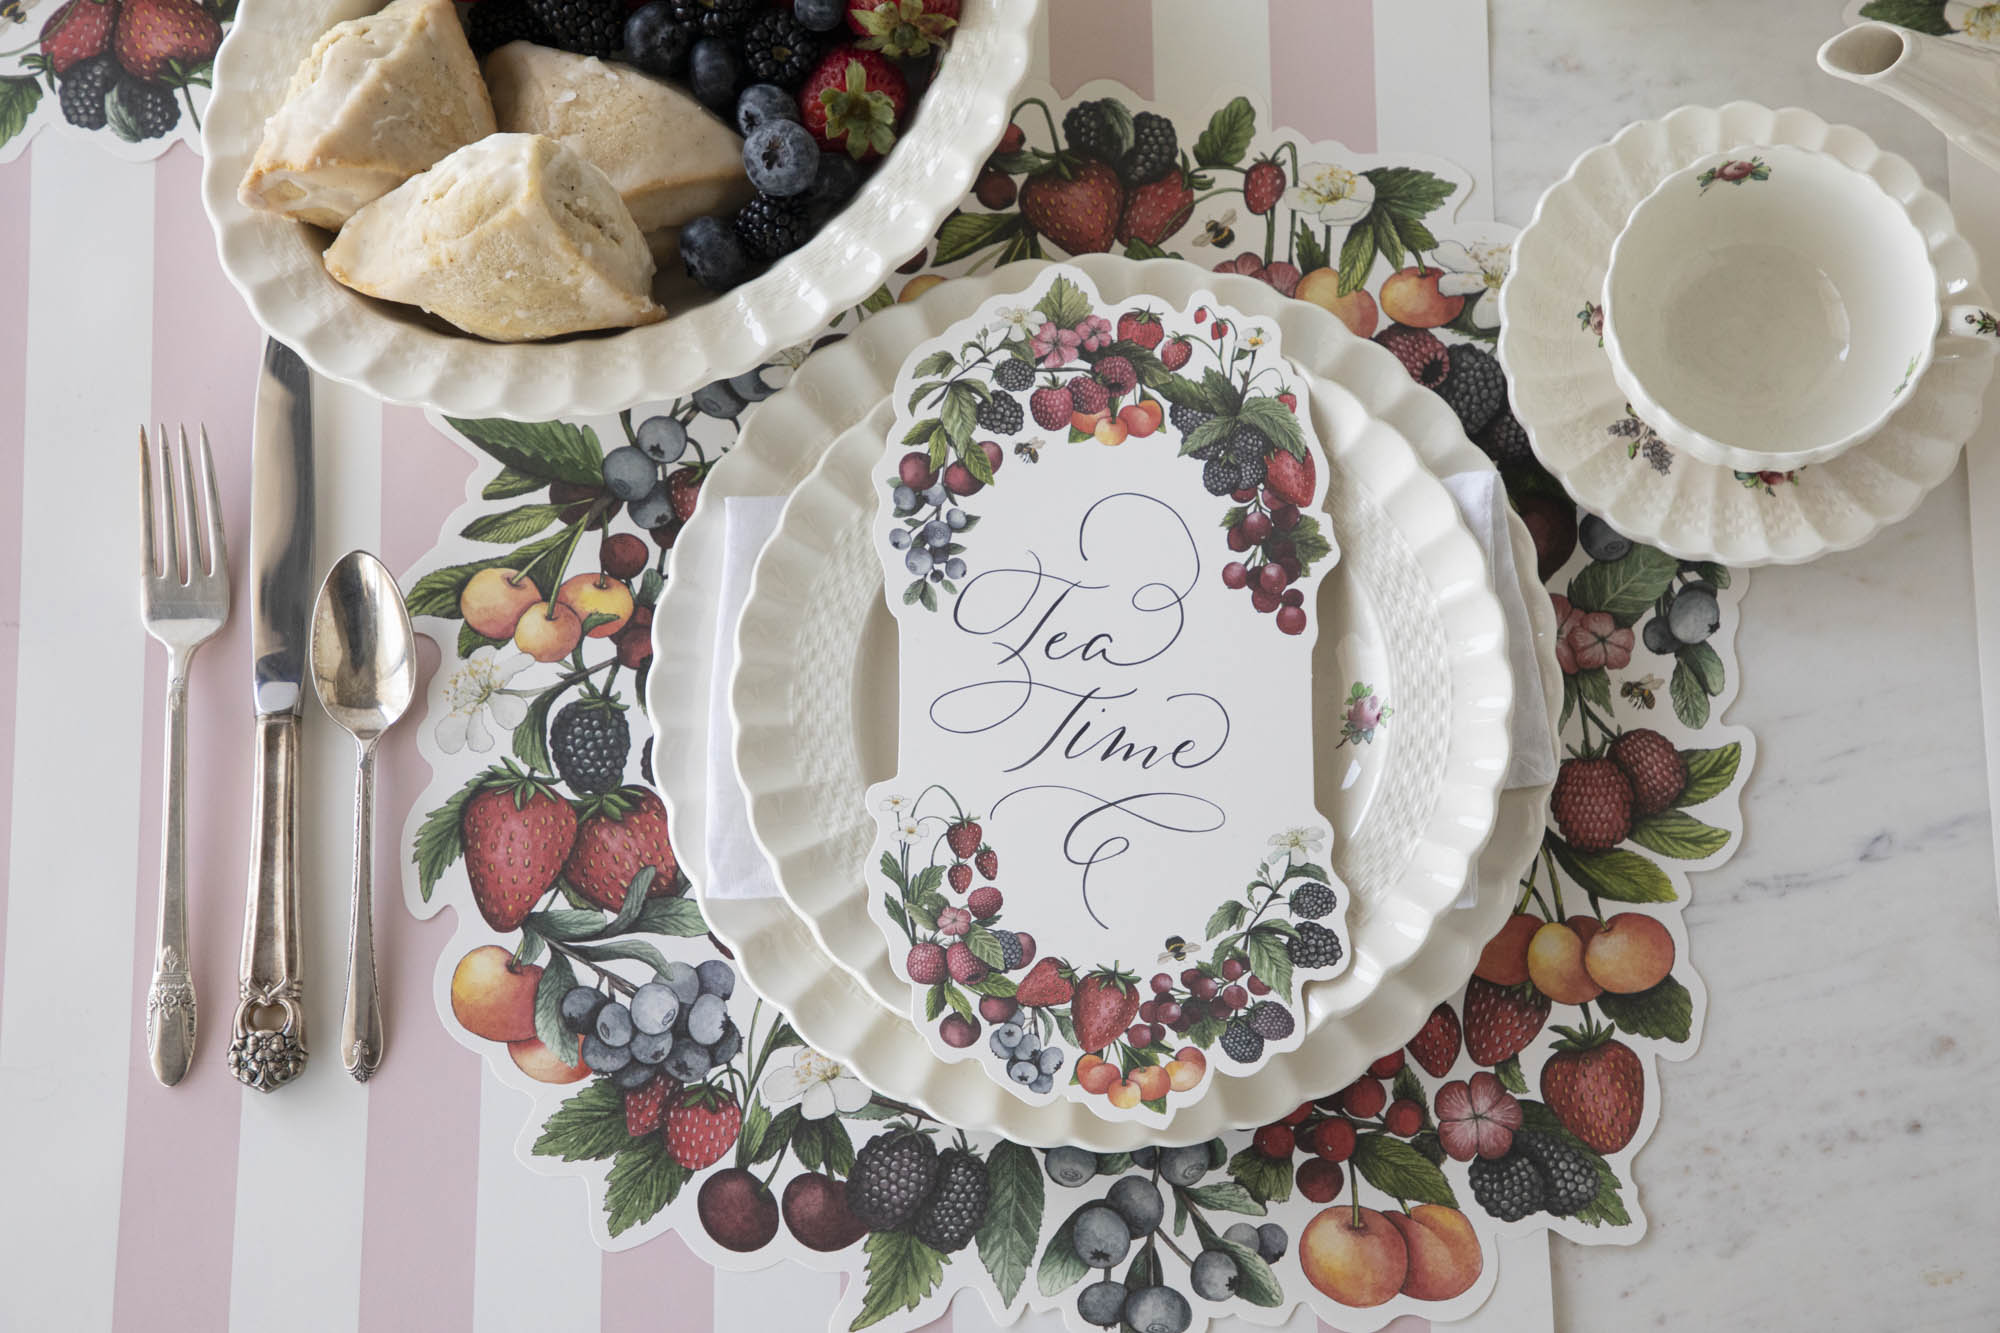 The Die-cut Berry Wreath Placemat under an elegant place setting, from above.